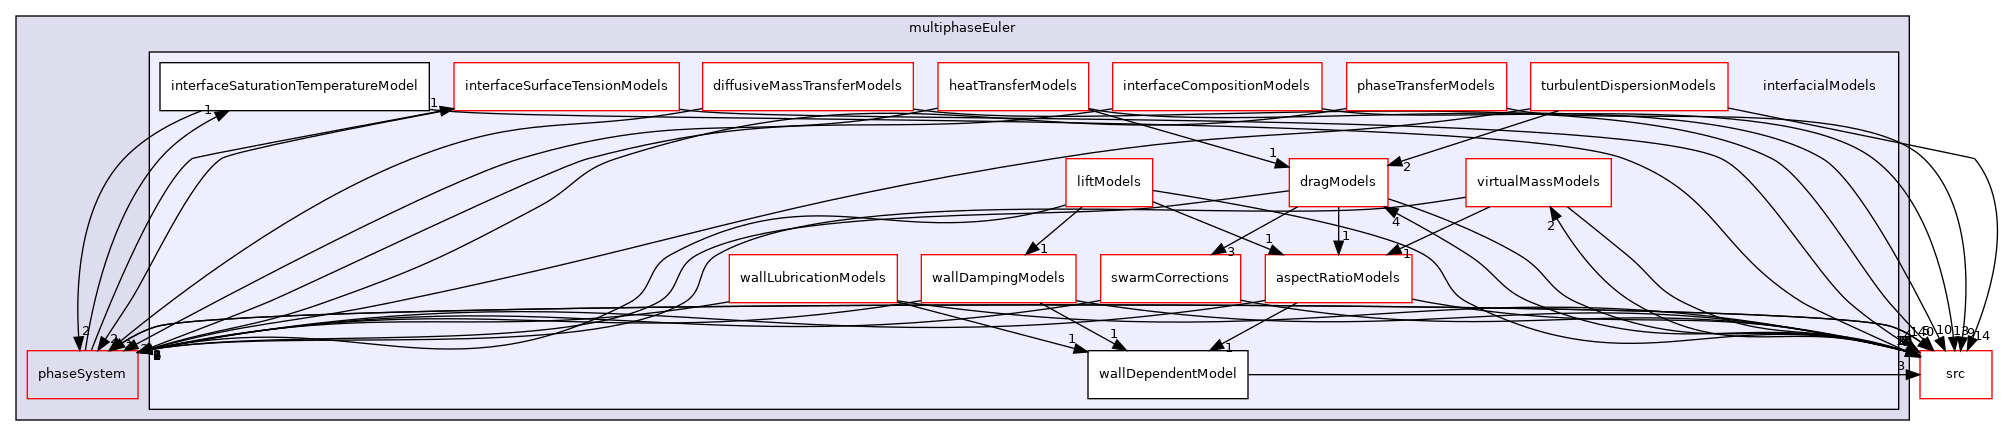 applications/modules/multiphaseEuler/interfacialModels